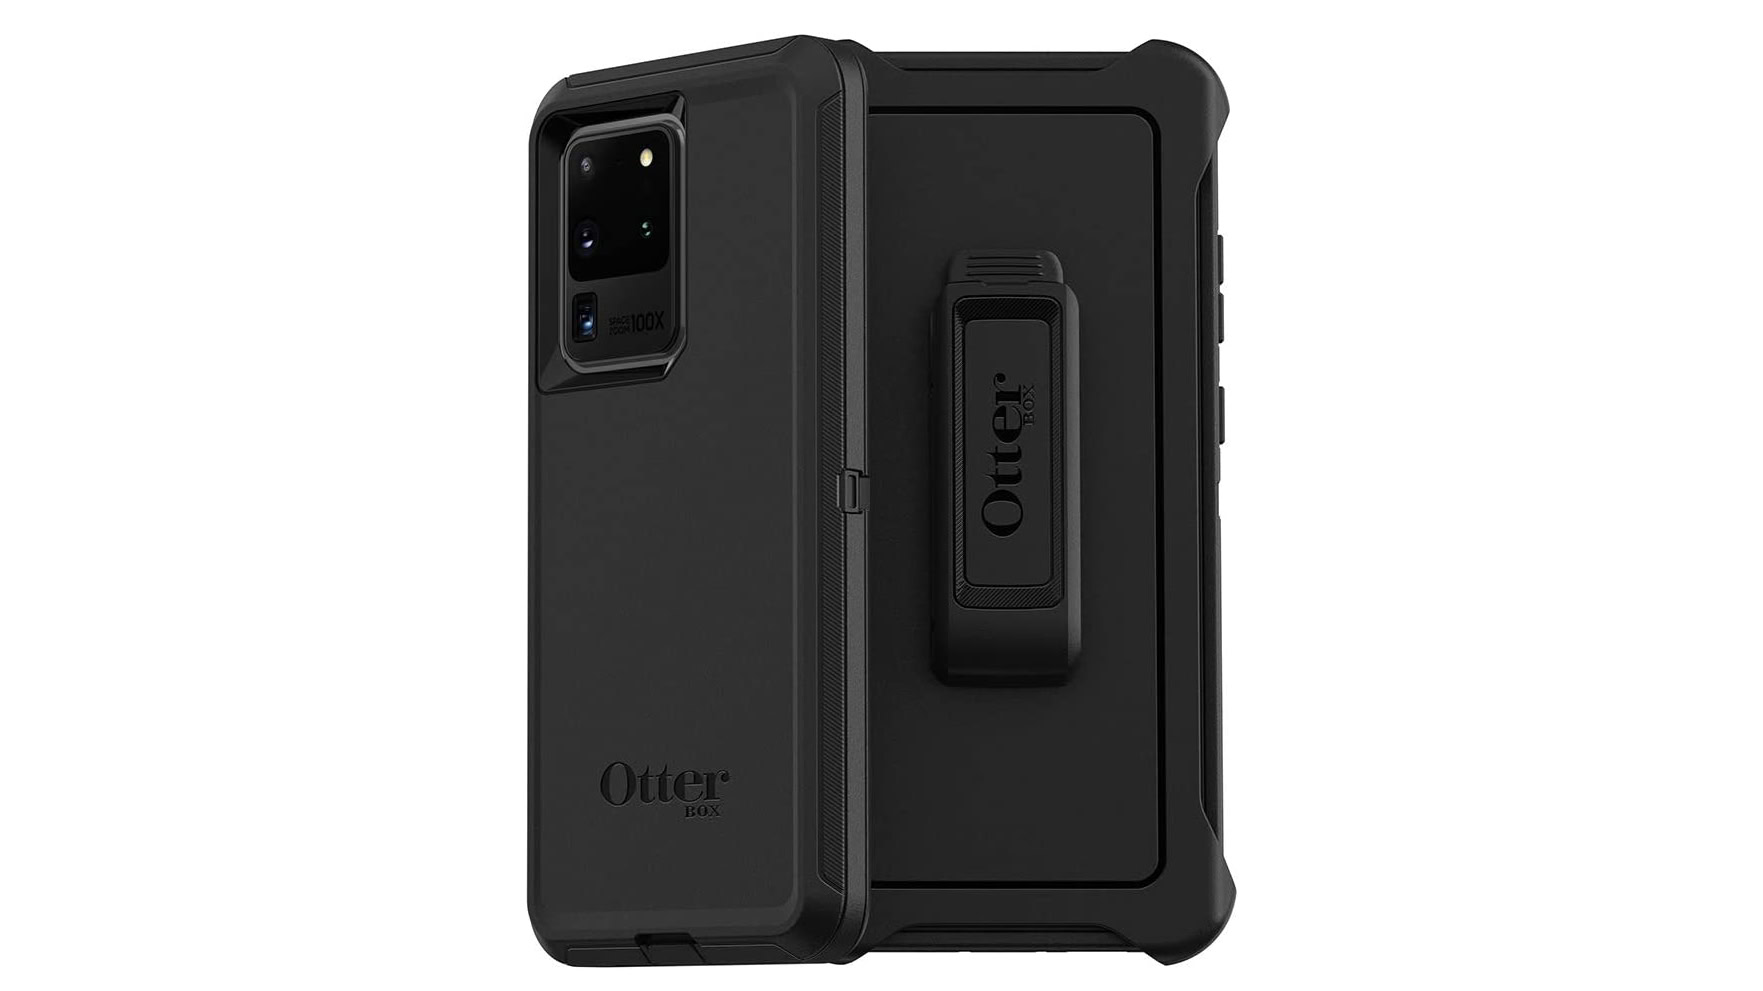 Otterbox Defender case for Samsung Galaxy S20 Ultra